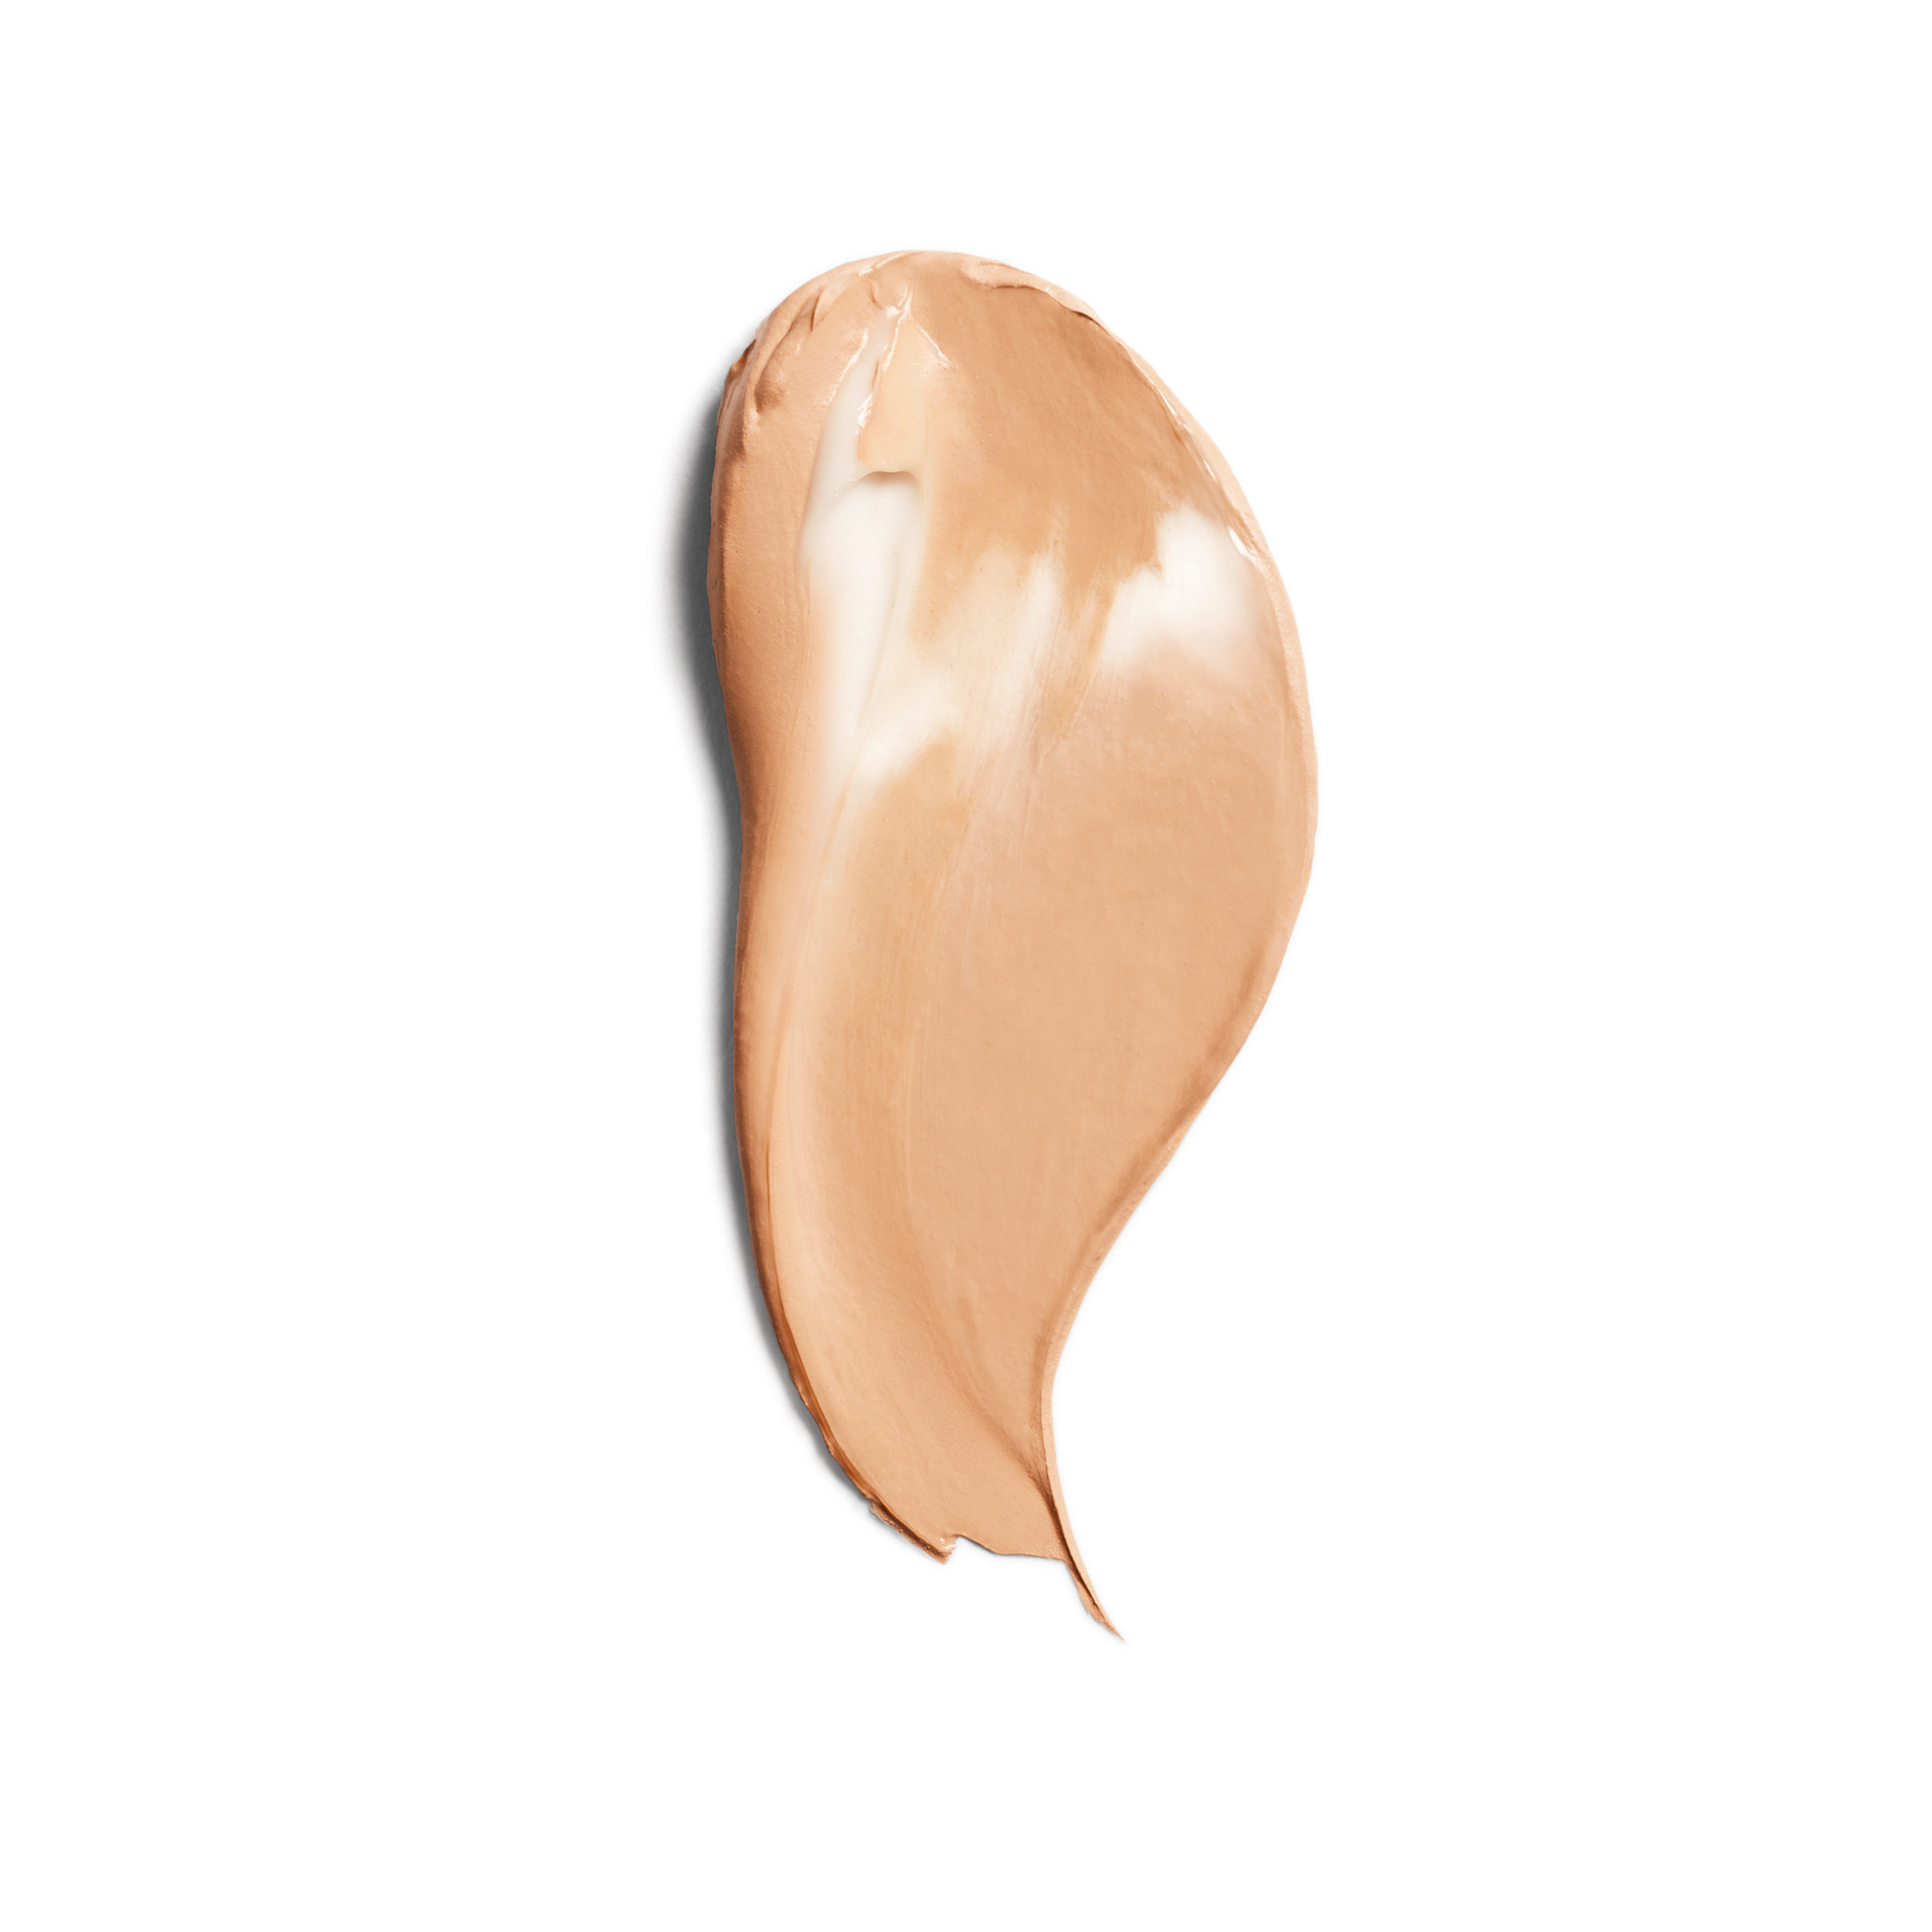 COVERGIRL + OLAY Simply Ageless Instant Wrinkle-Defying Foundation with SPF 28, Soft Honey, 0.44 oz - image 3 of 9